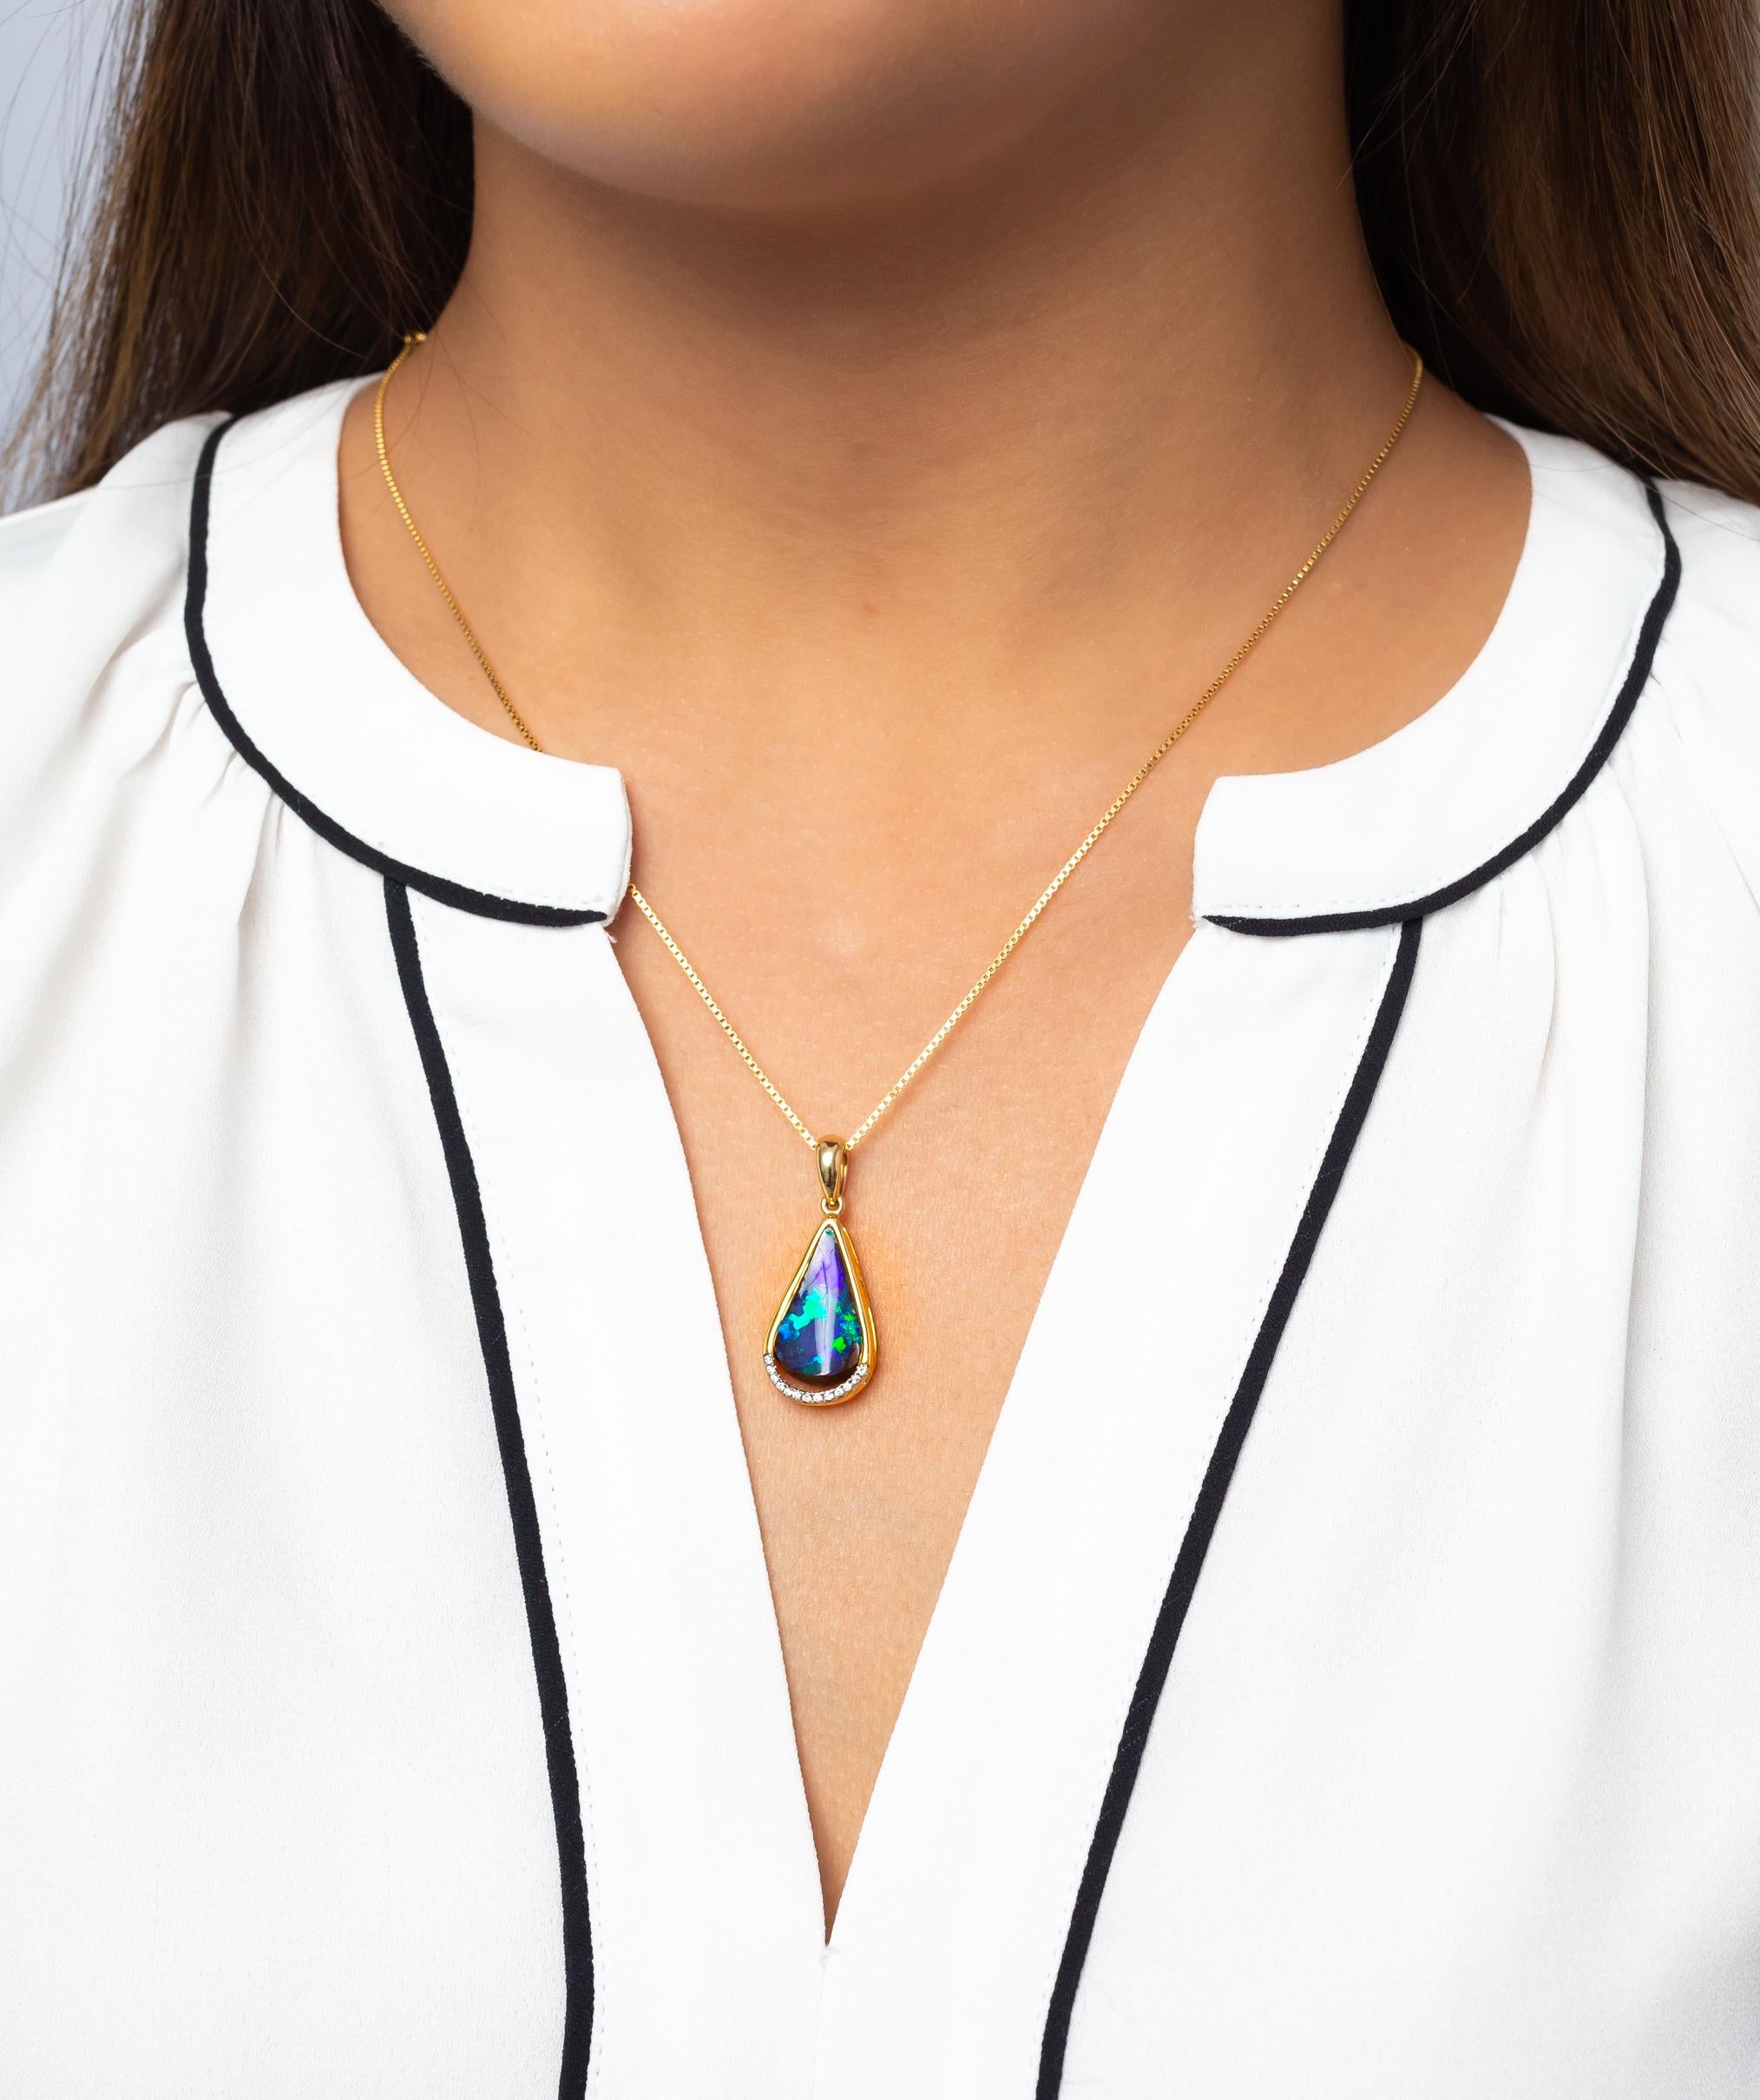 “A Love Song” opal pendant is understated elegance. The 5.81ct Winton boulder opal is framed by 18K yellow gold and cradled by glittering diamonds. For the times you can’t find the words to express your love. Designed by Renata Bernard. This pendant